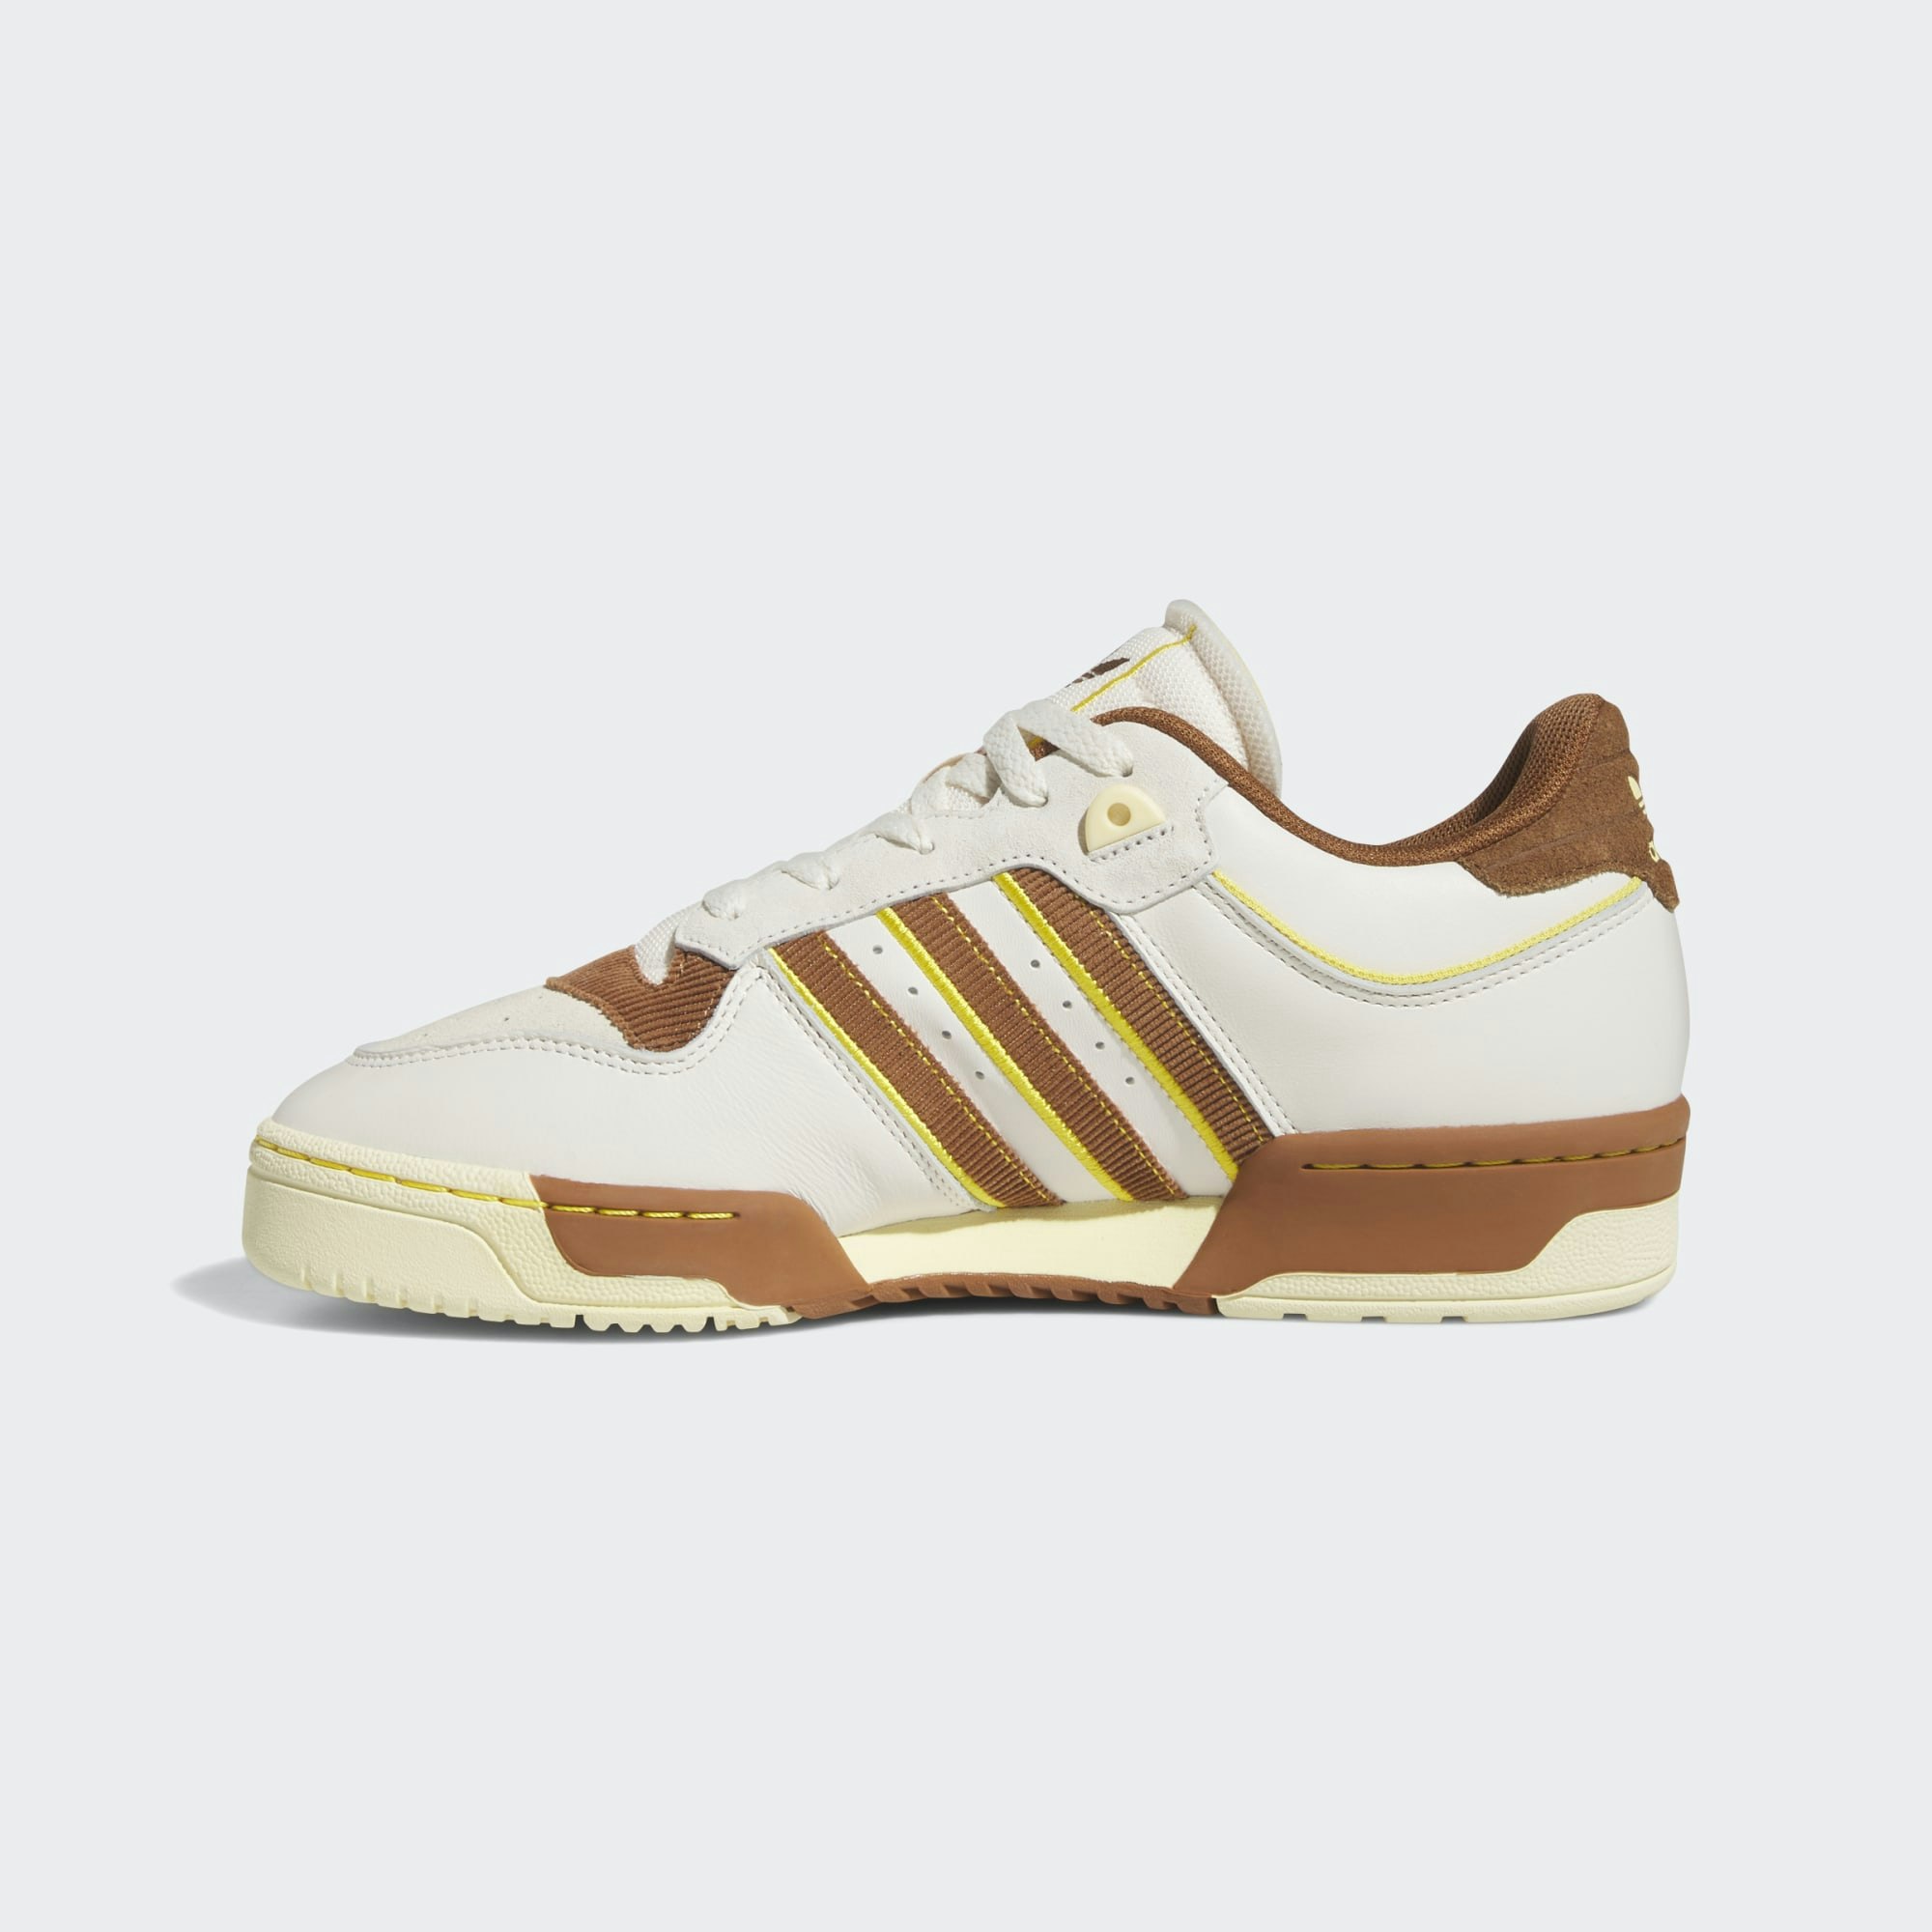 adidas Rivalry 86 Low "Wild Brown"